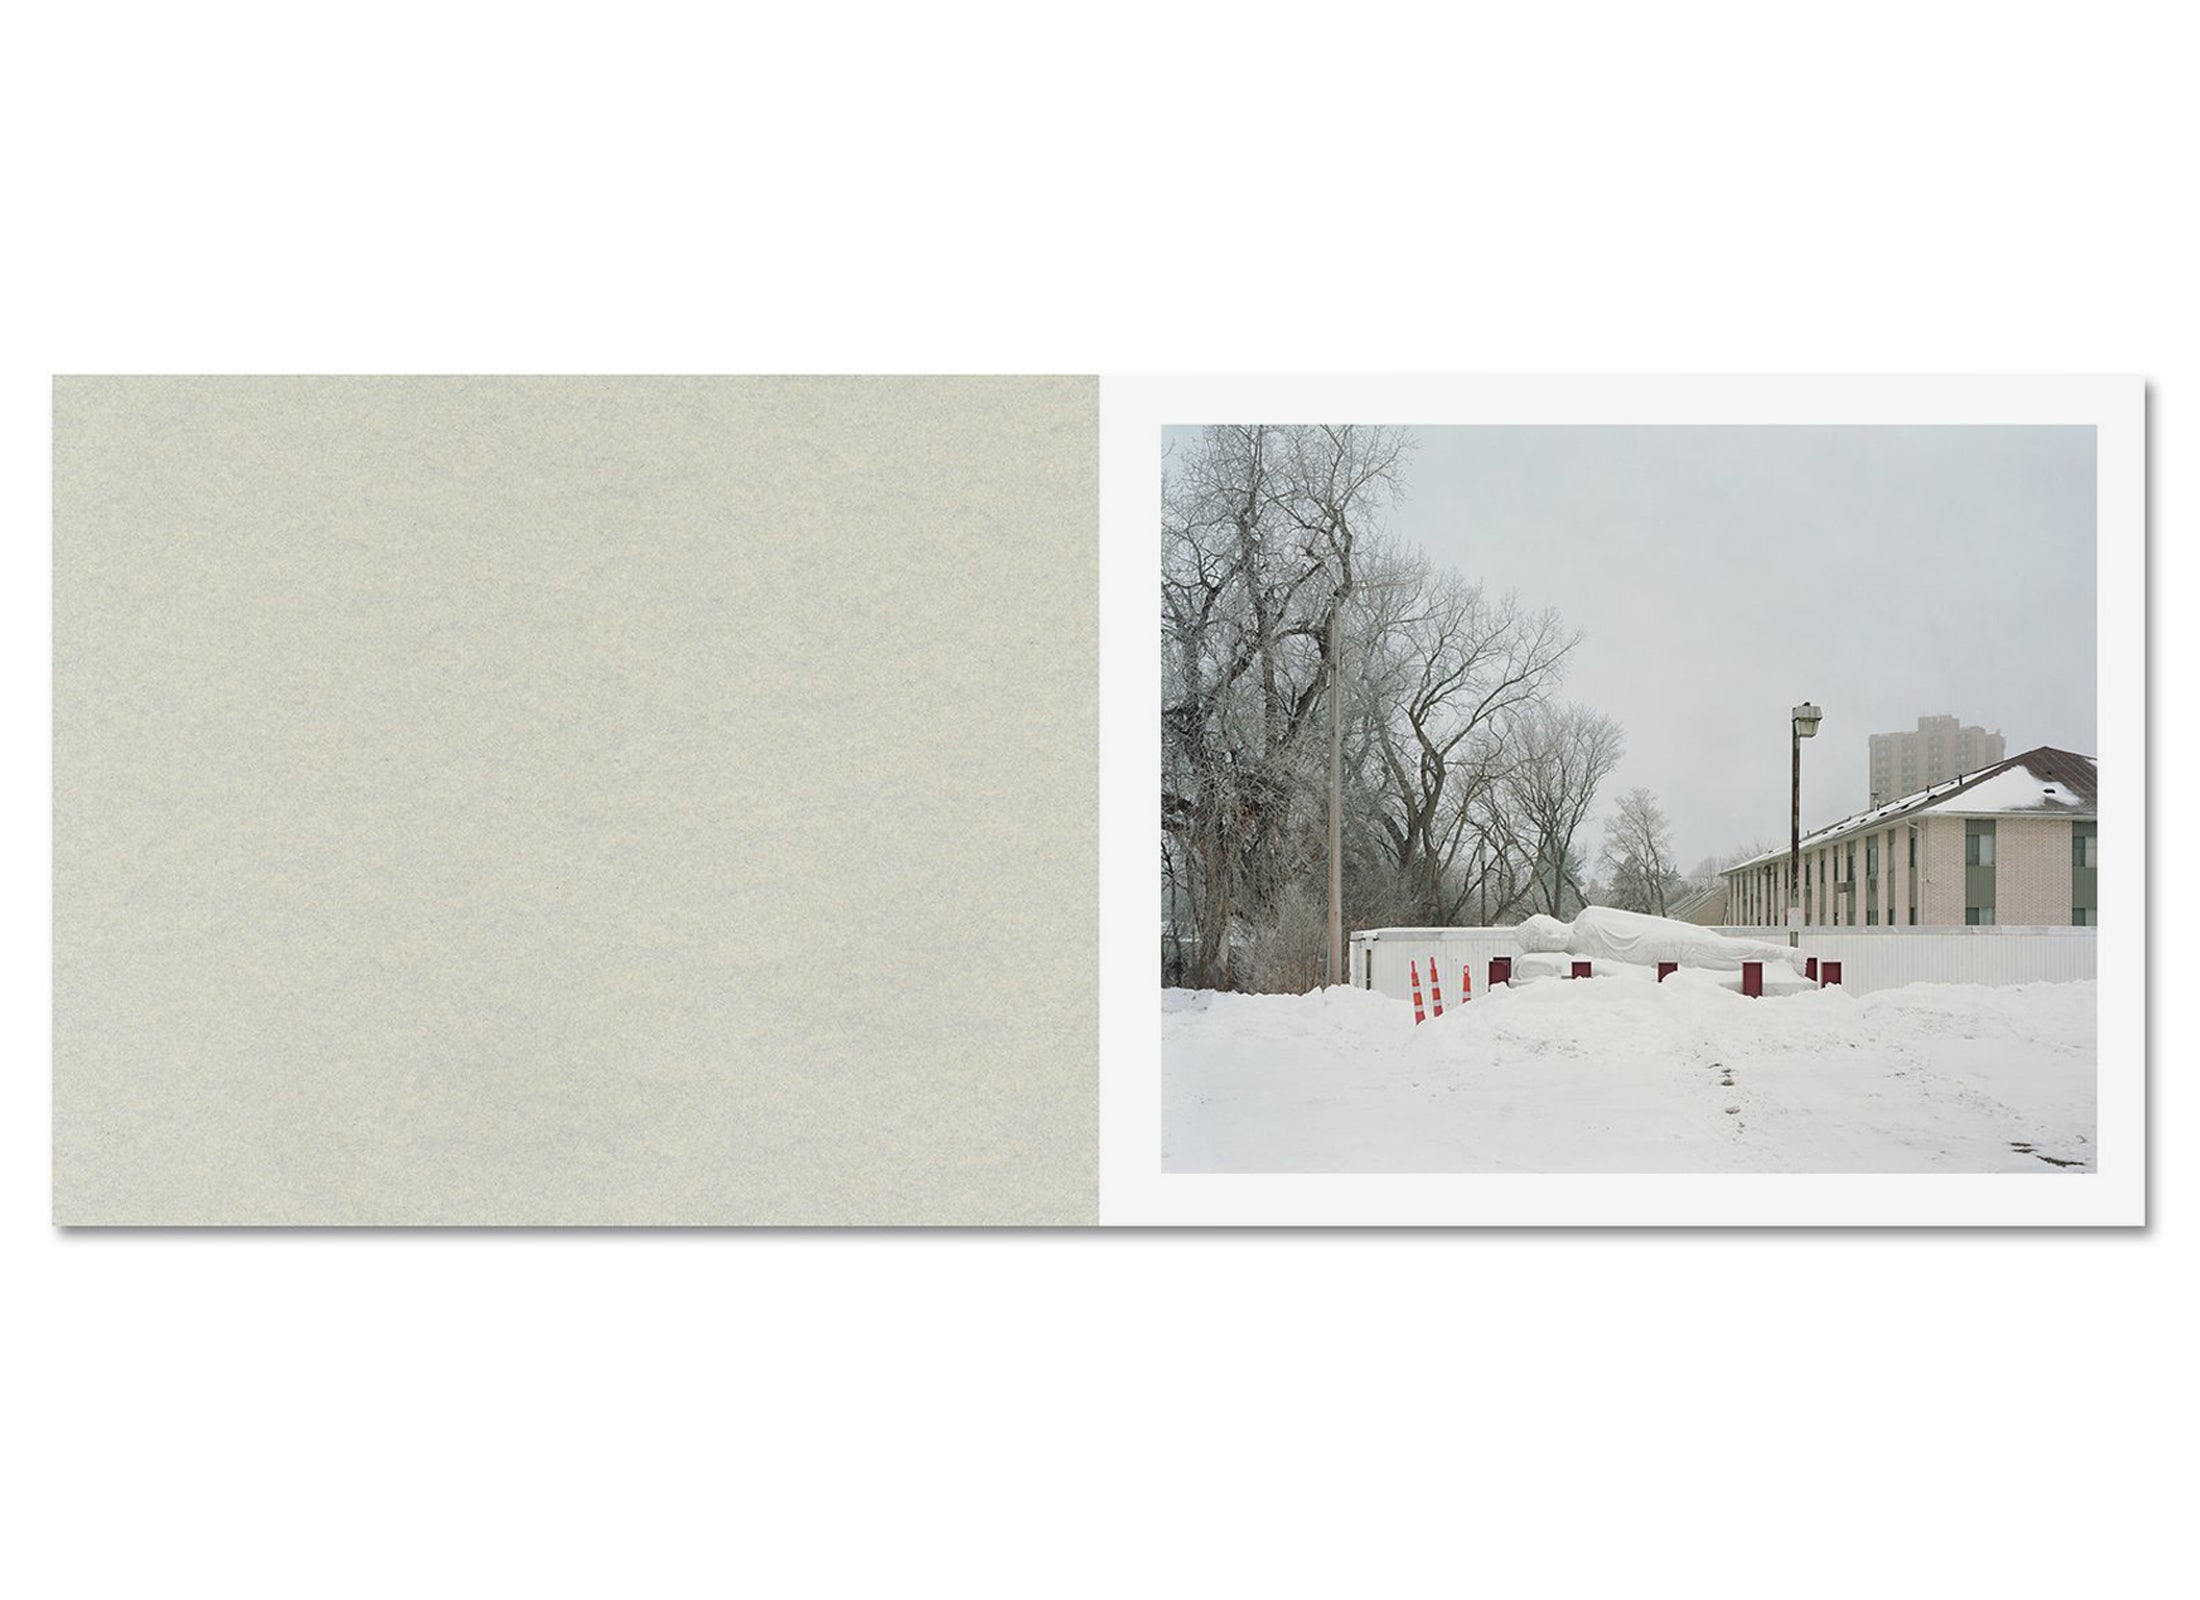 A POUND OF PICTURES by Alec Soth [SPECIAL EDITION]